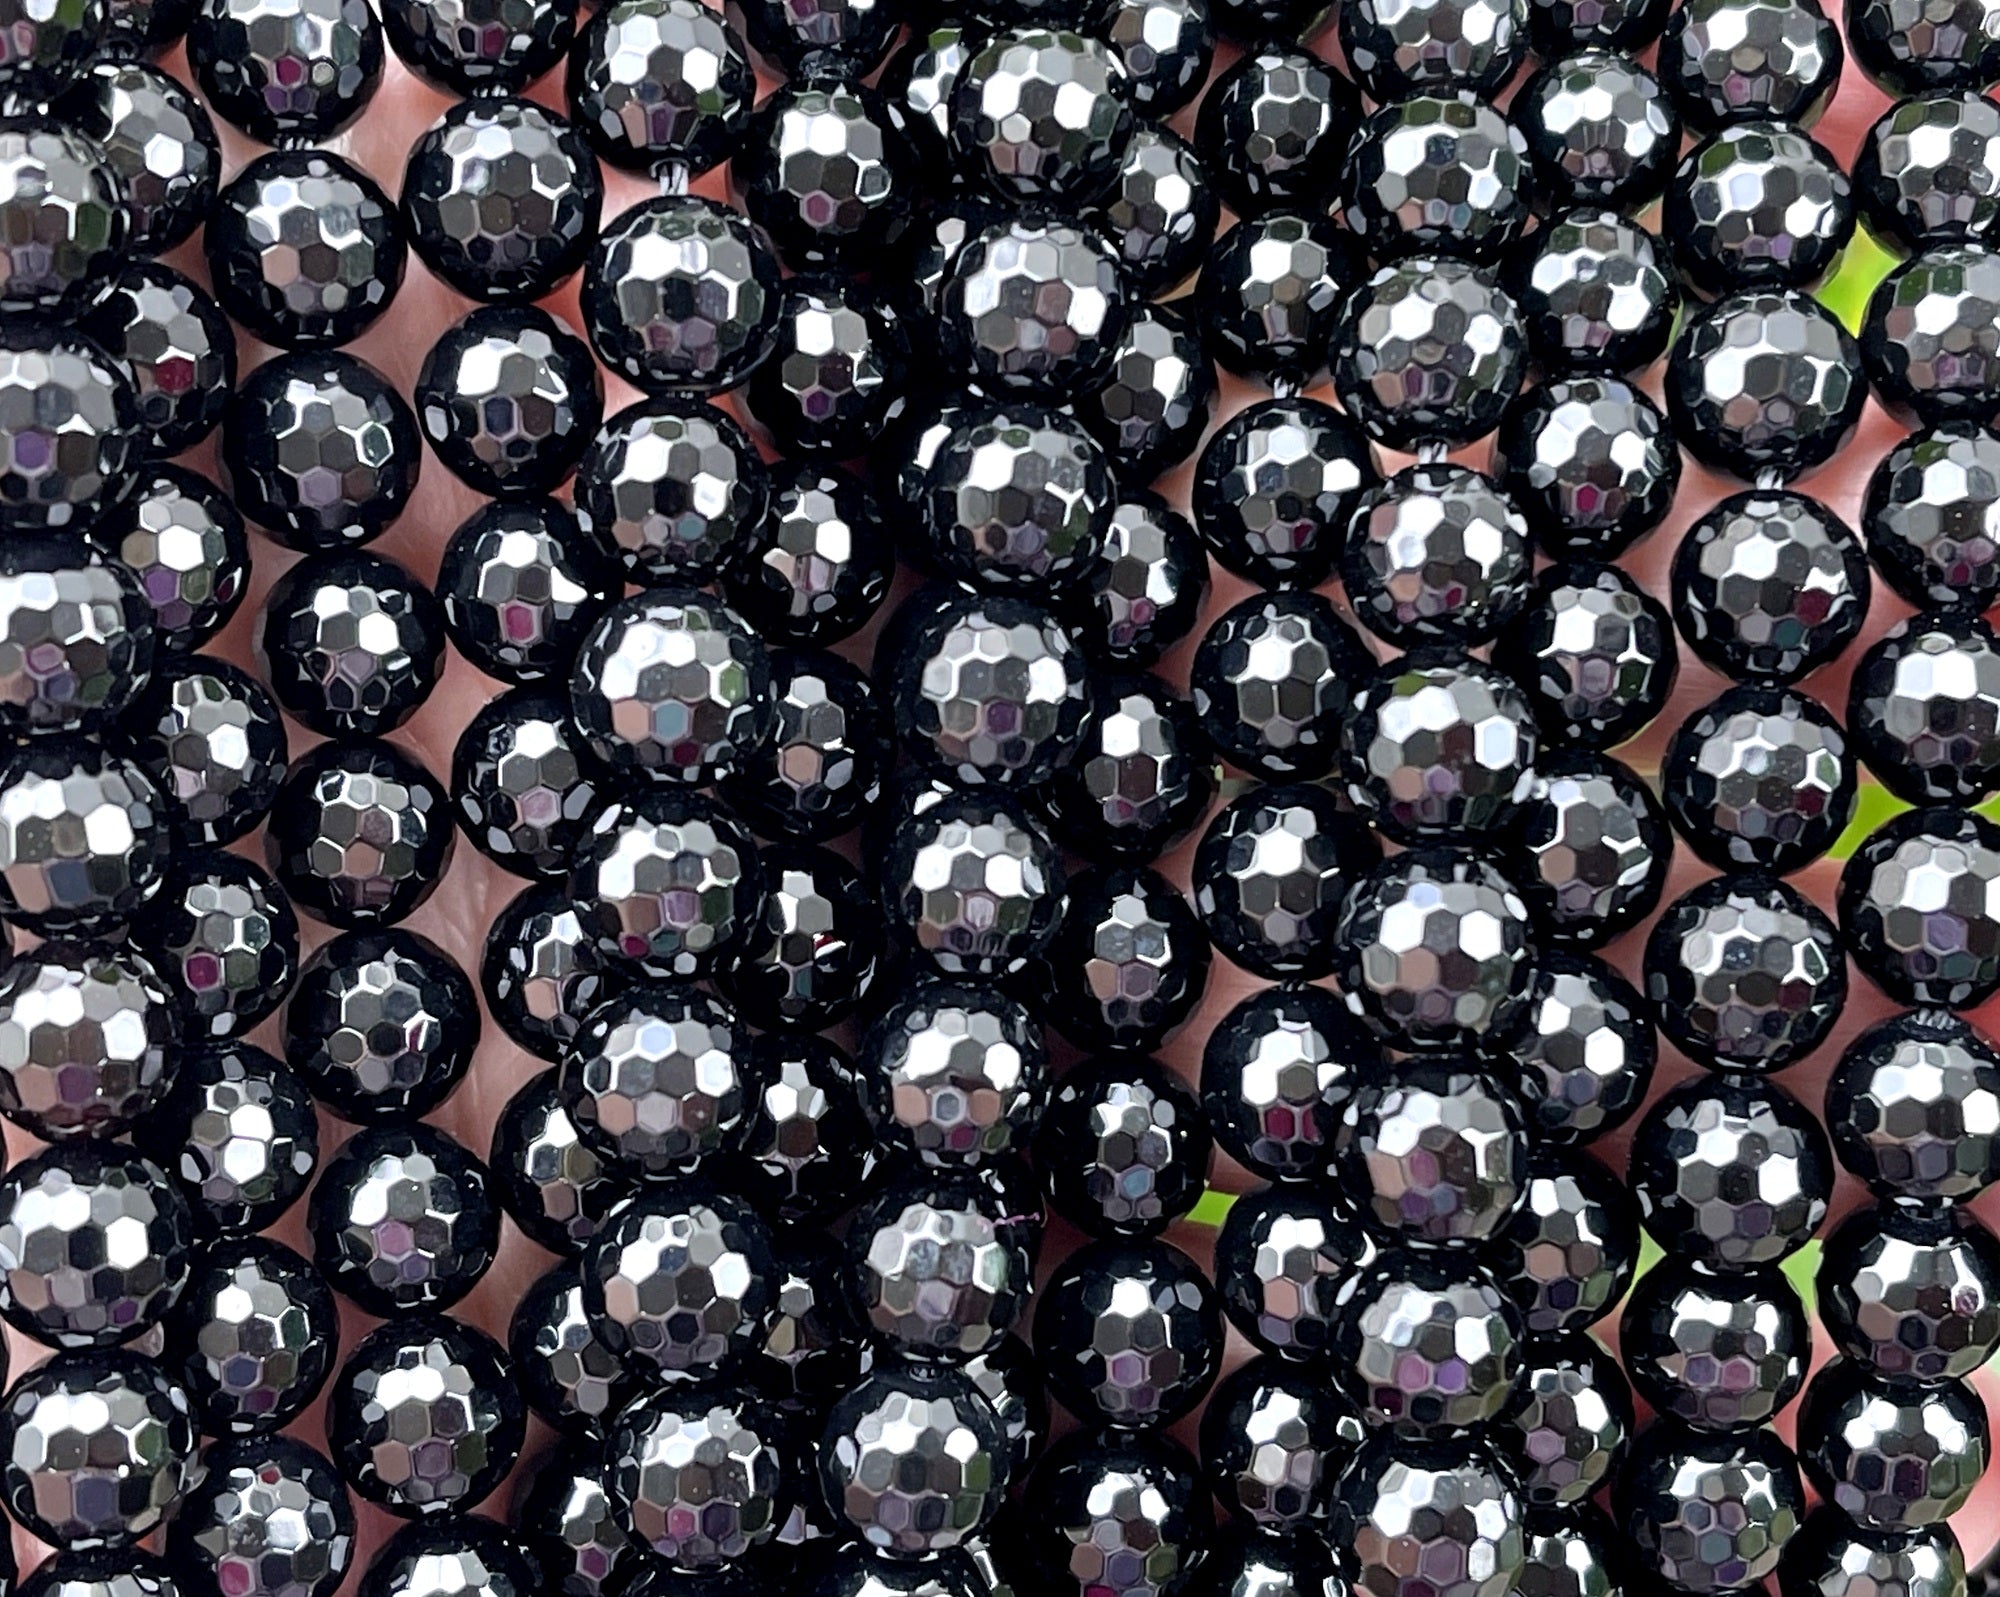 Black Onyx 8mm round micro faceted gemstone beads 15.5" strand